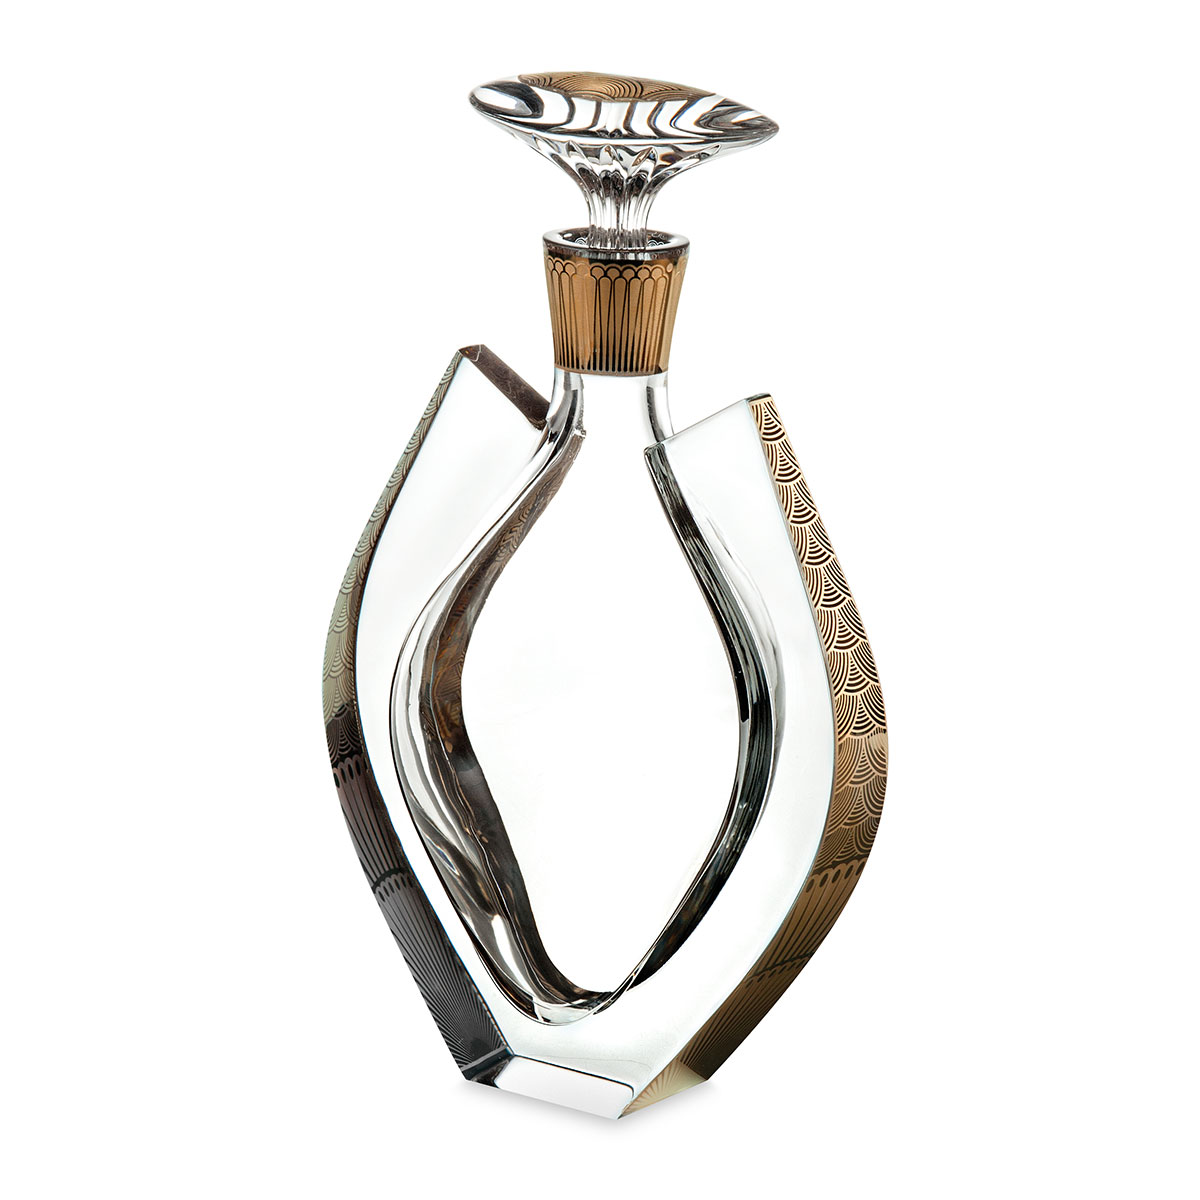 Vista Alegre Crystal Fenix Case with Whisky Decanter with Gold